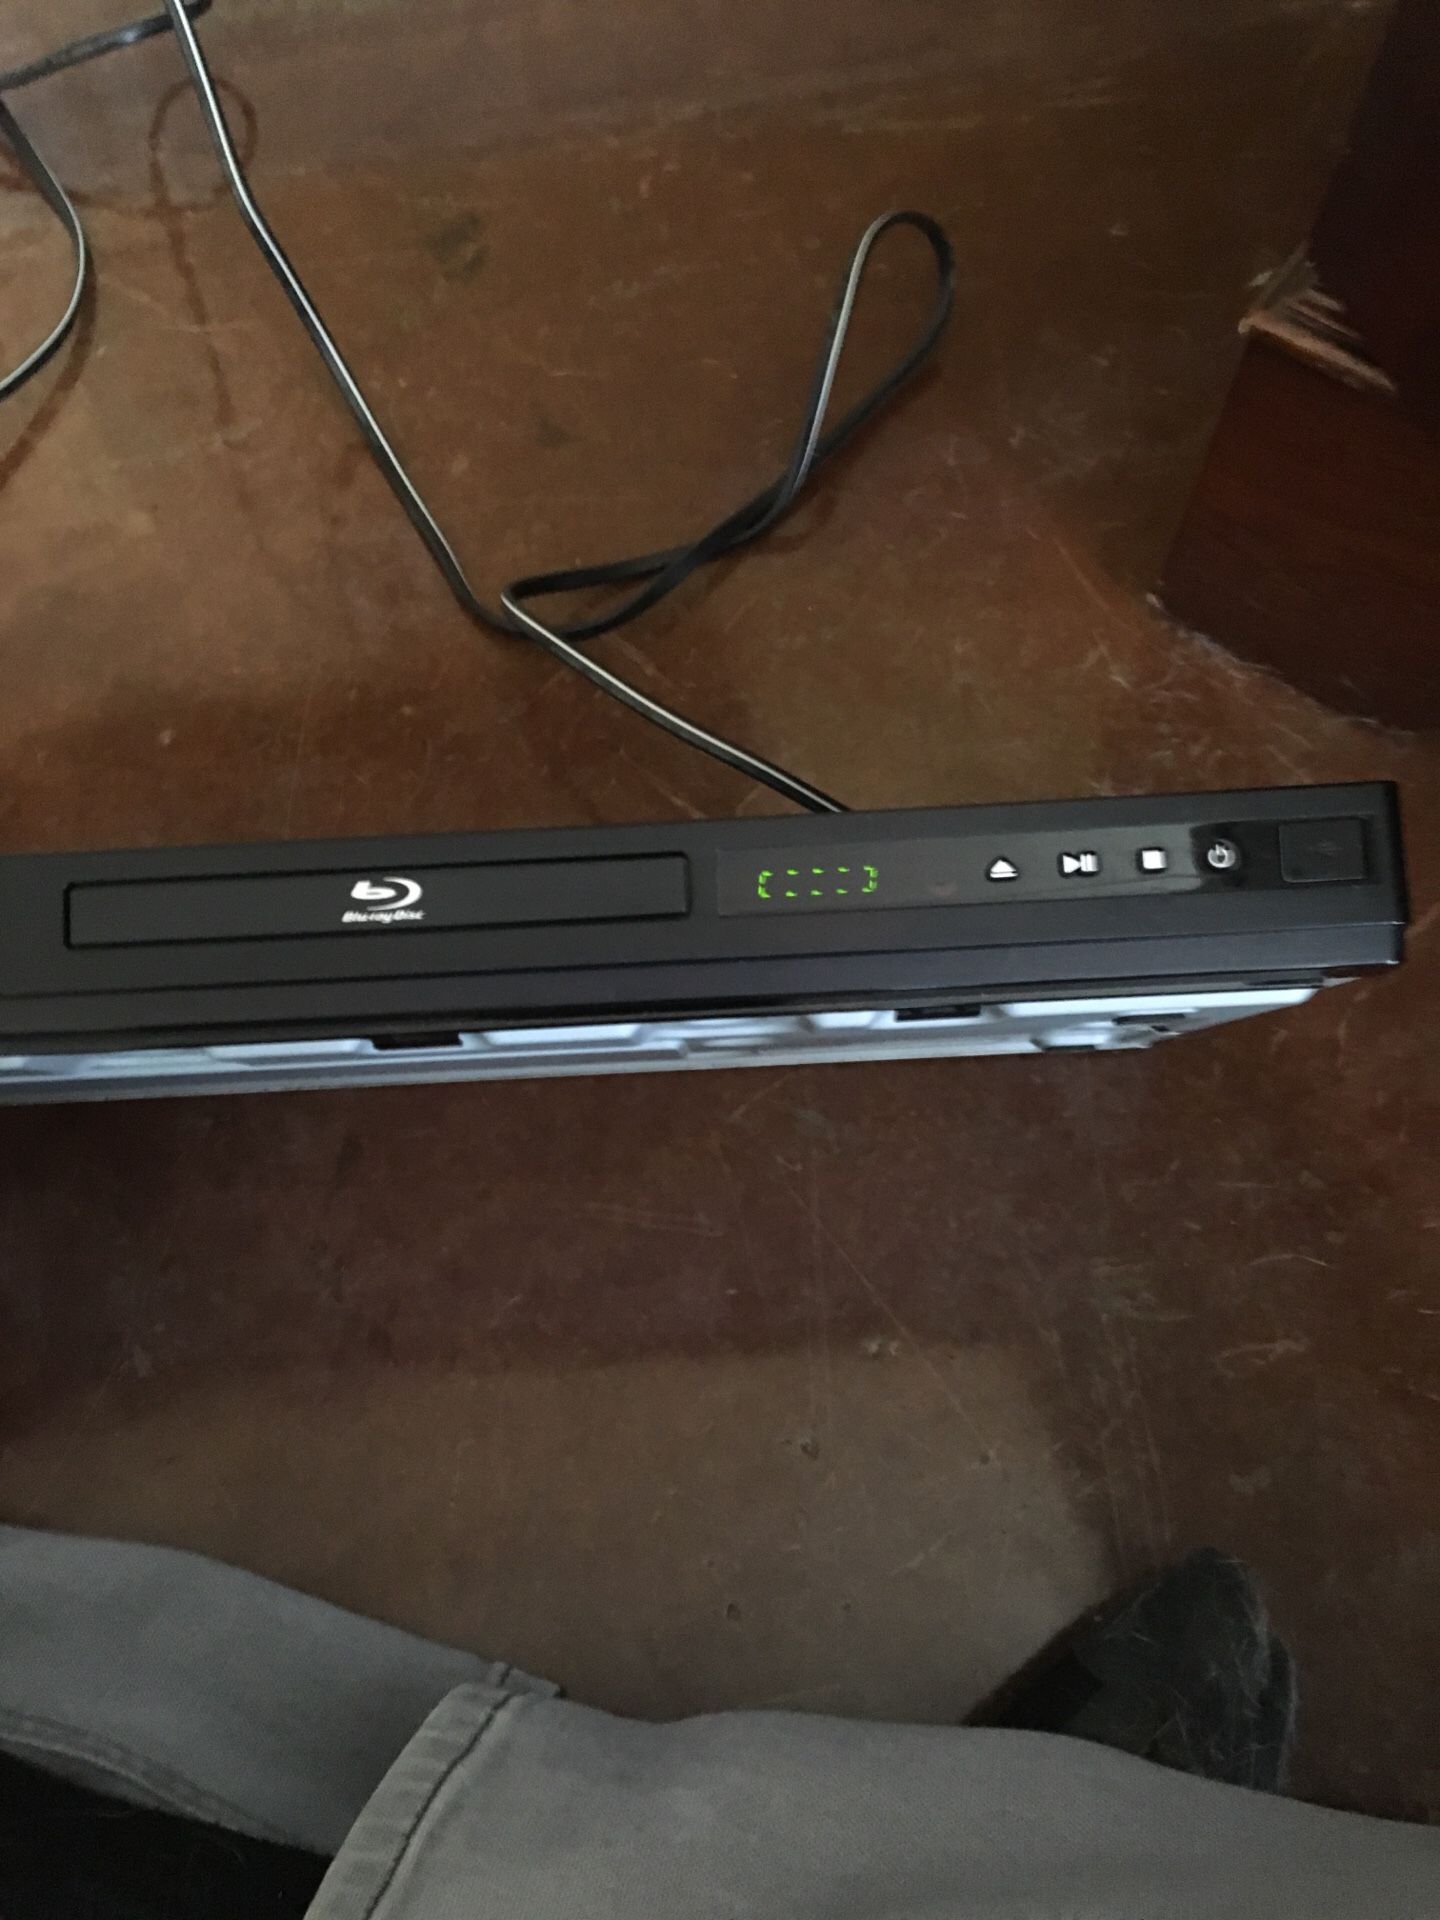 Blu-ray and DVD player works fine comes with remote